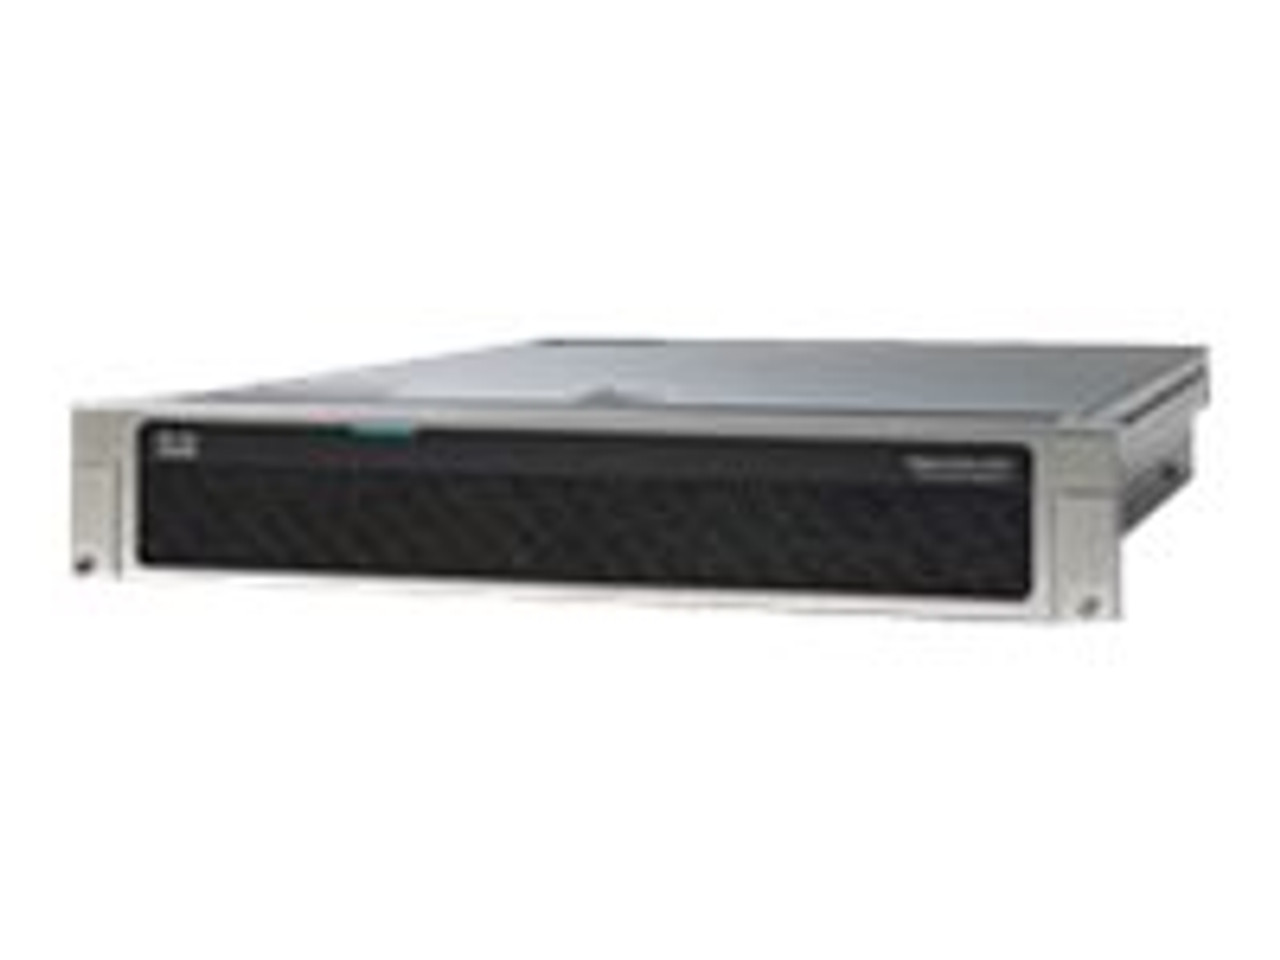 Web Security Appliance S670 